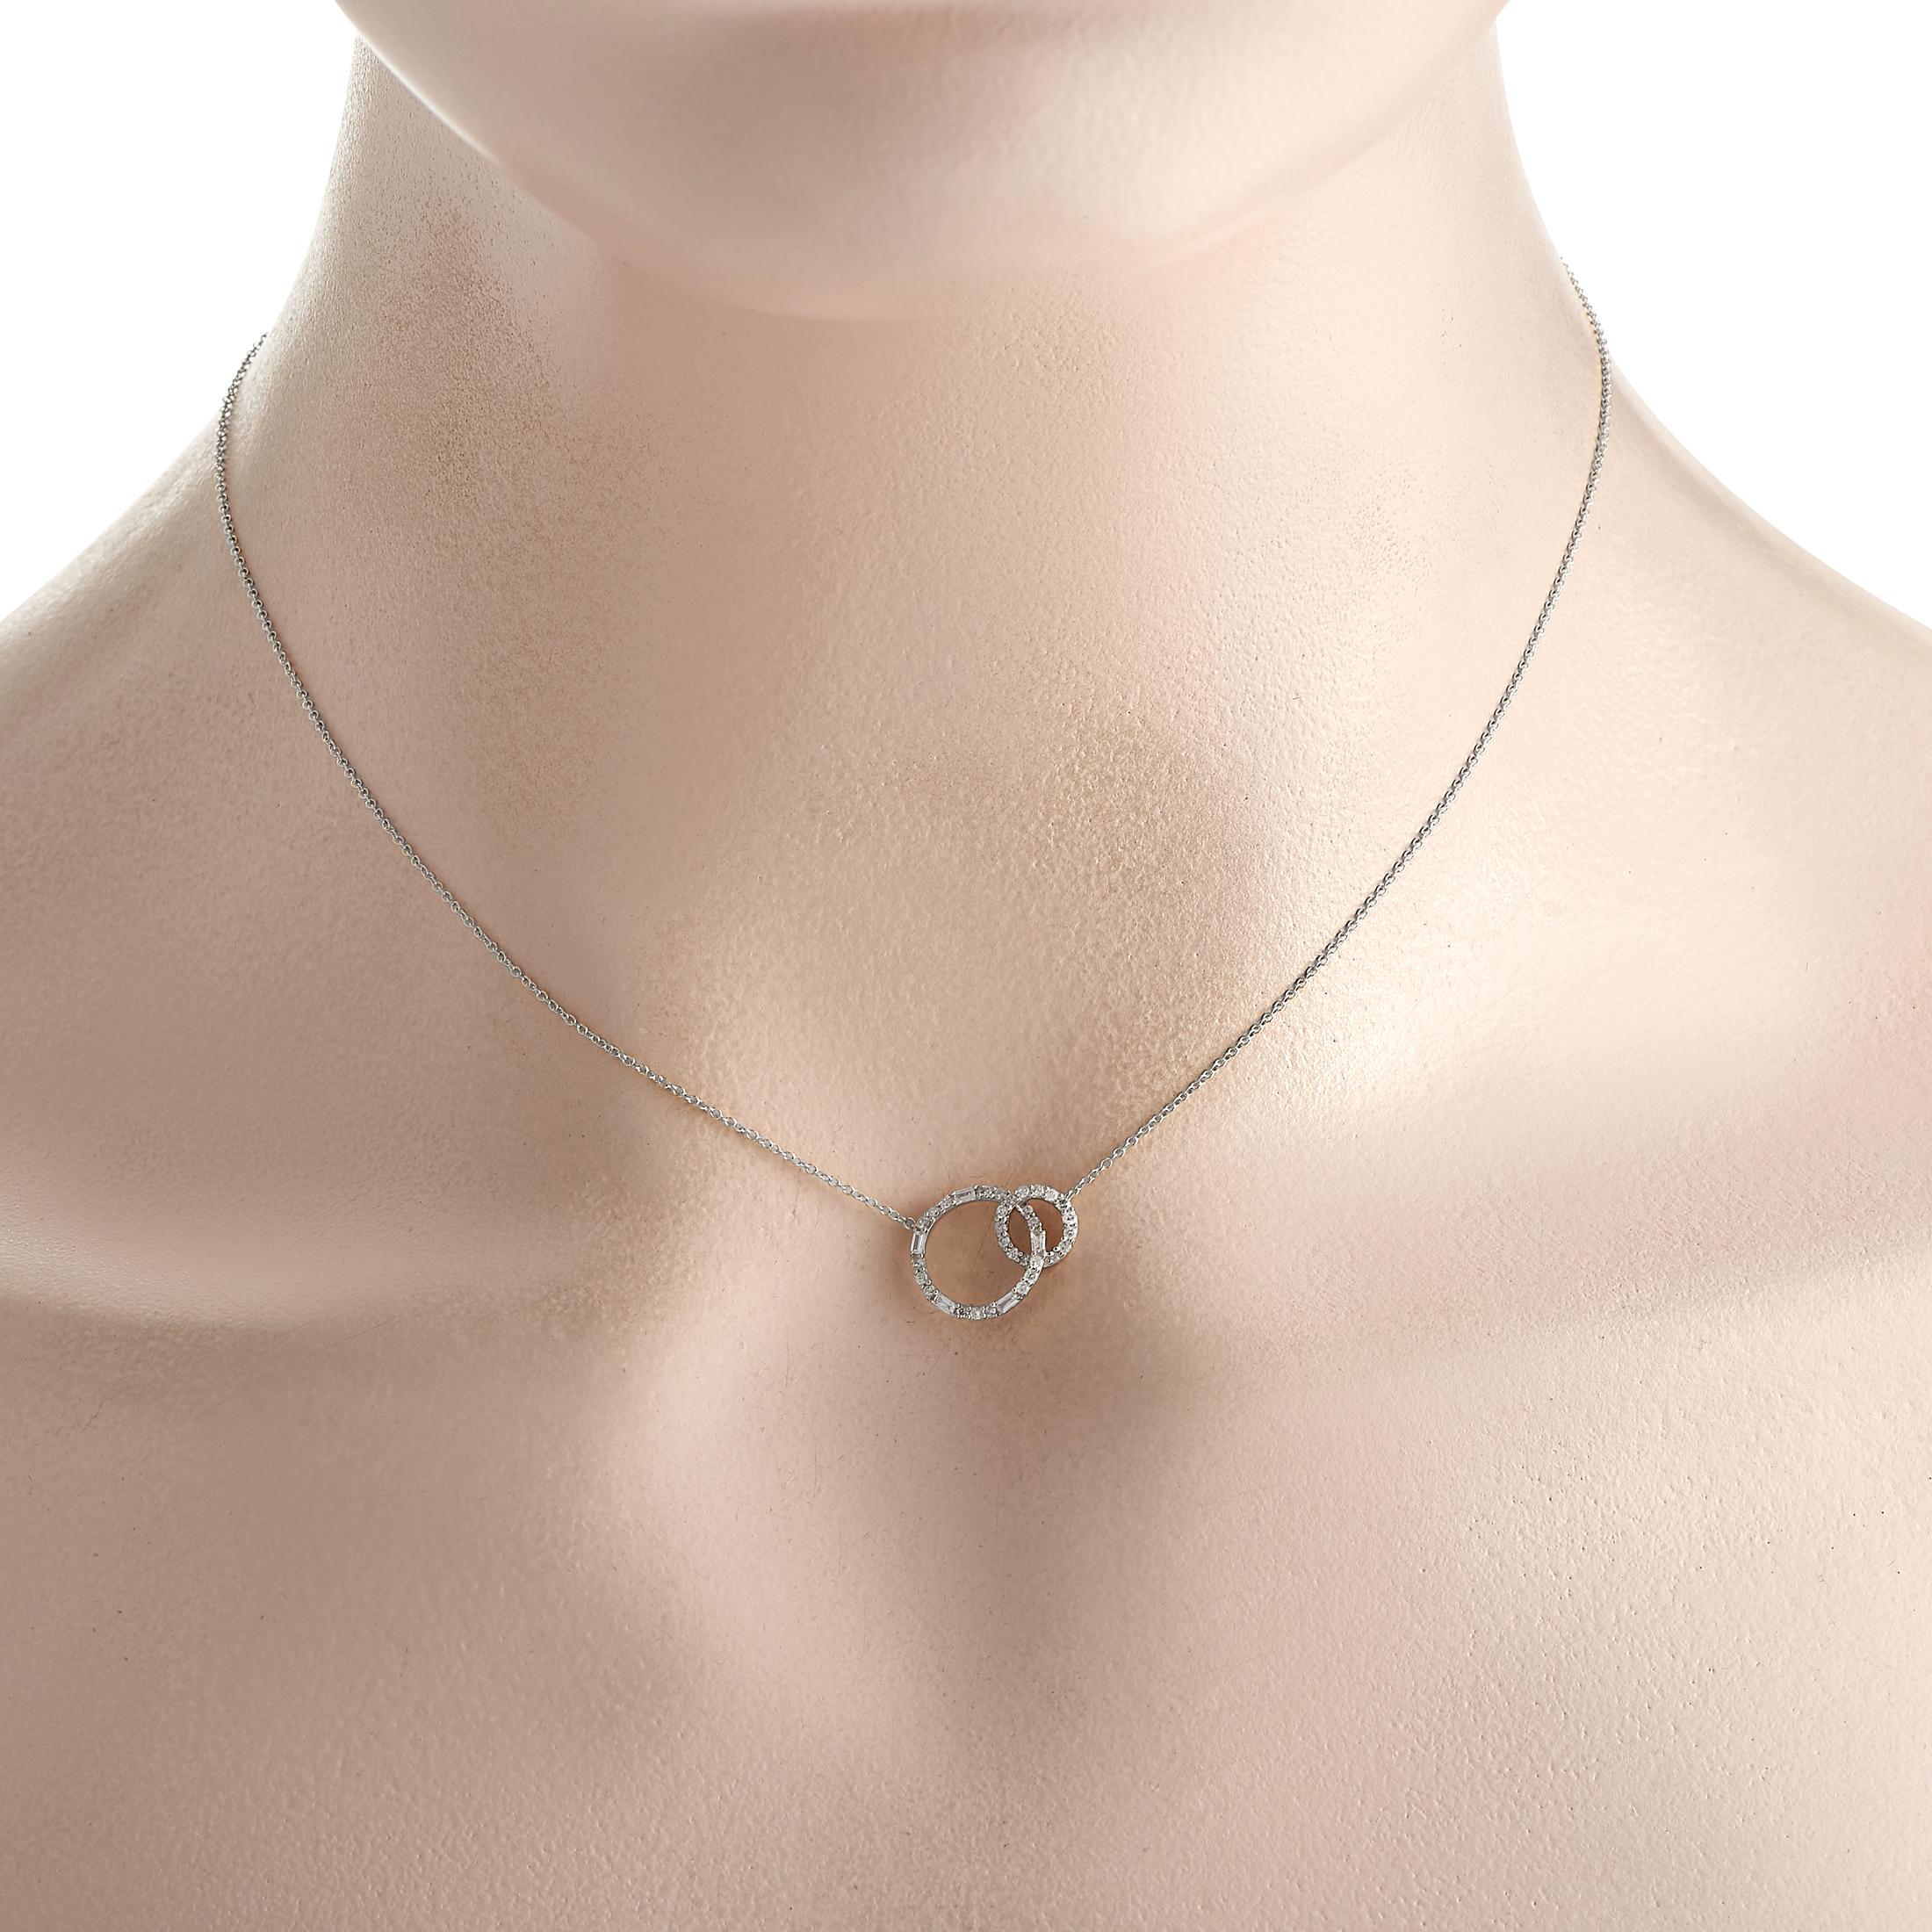 A lovely necklace that makes a symbolic gift. This LB Exclusive piece features a pendant with two sparkling circles intertwined, perfectly representing a bond between two people or the journey of two lives intertwined. The pendant measures 0.5